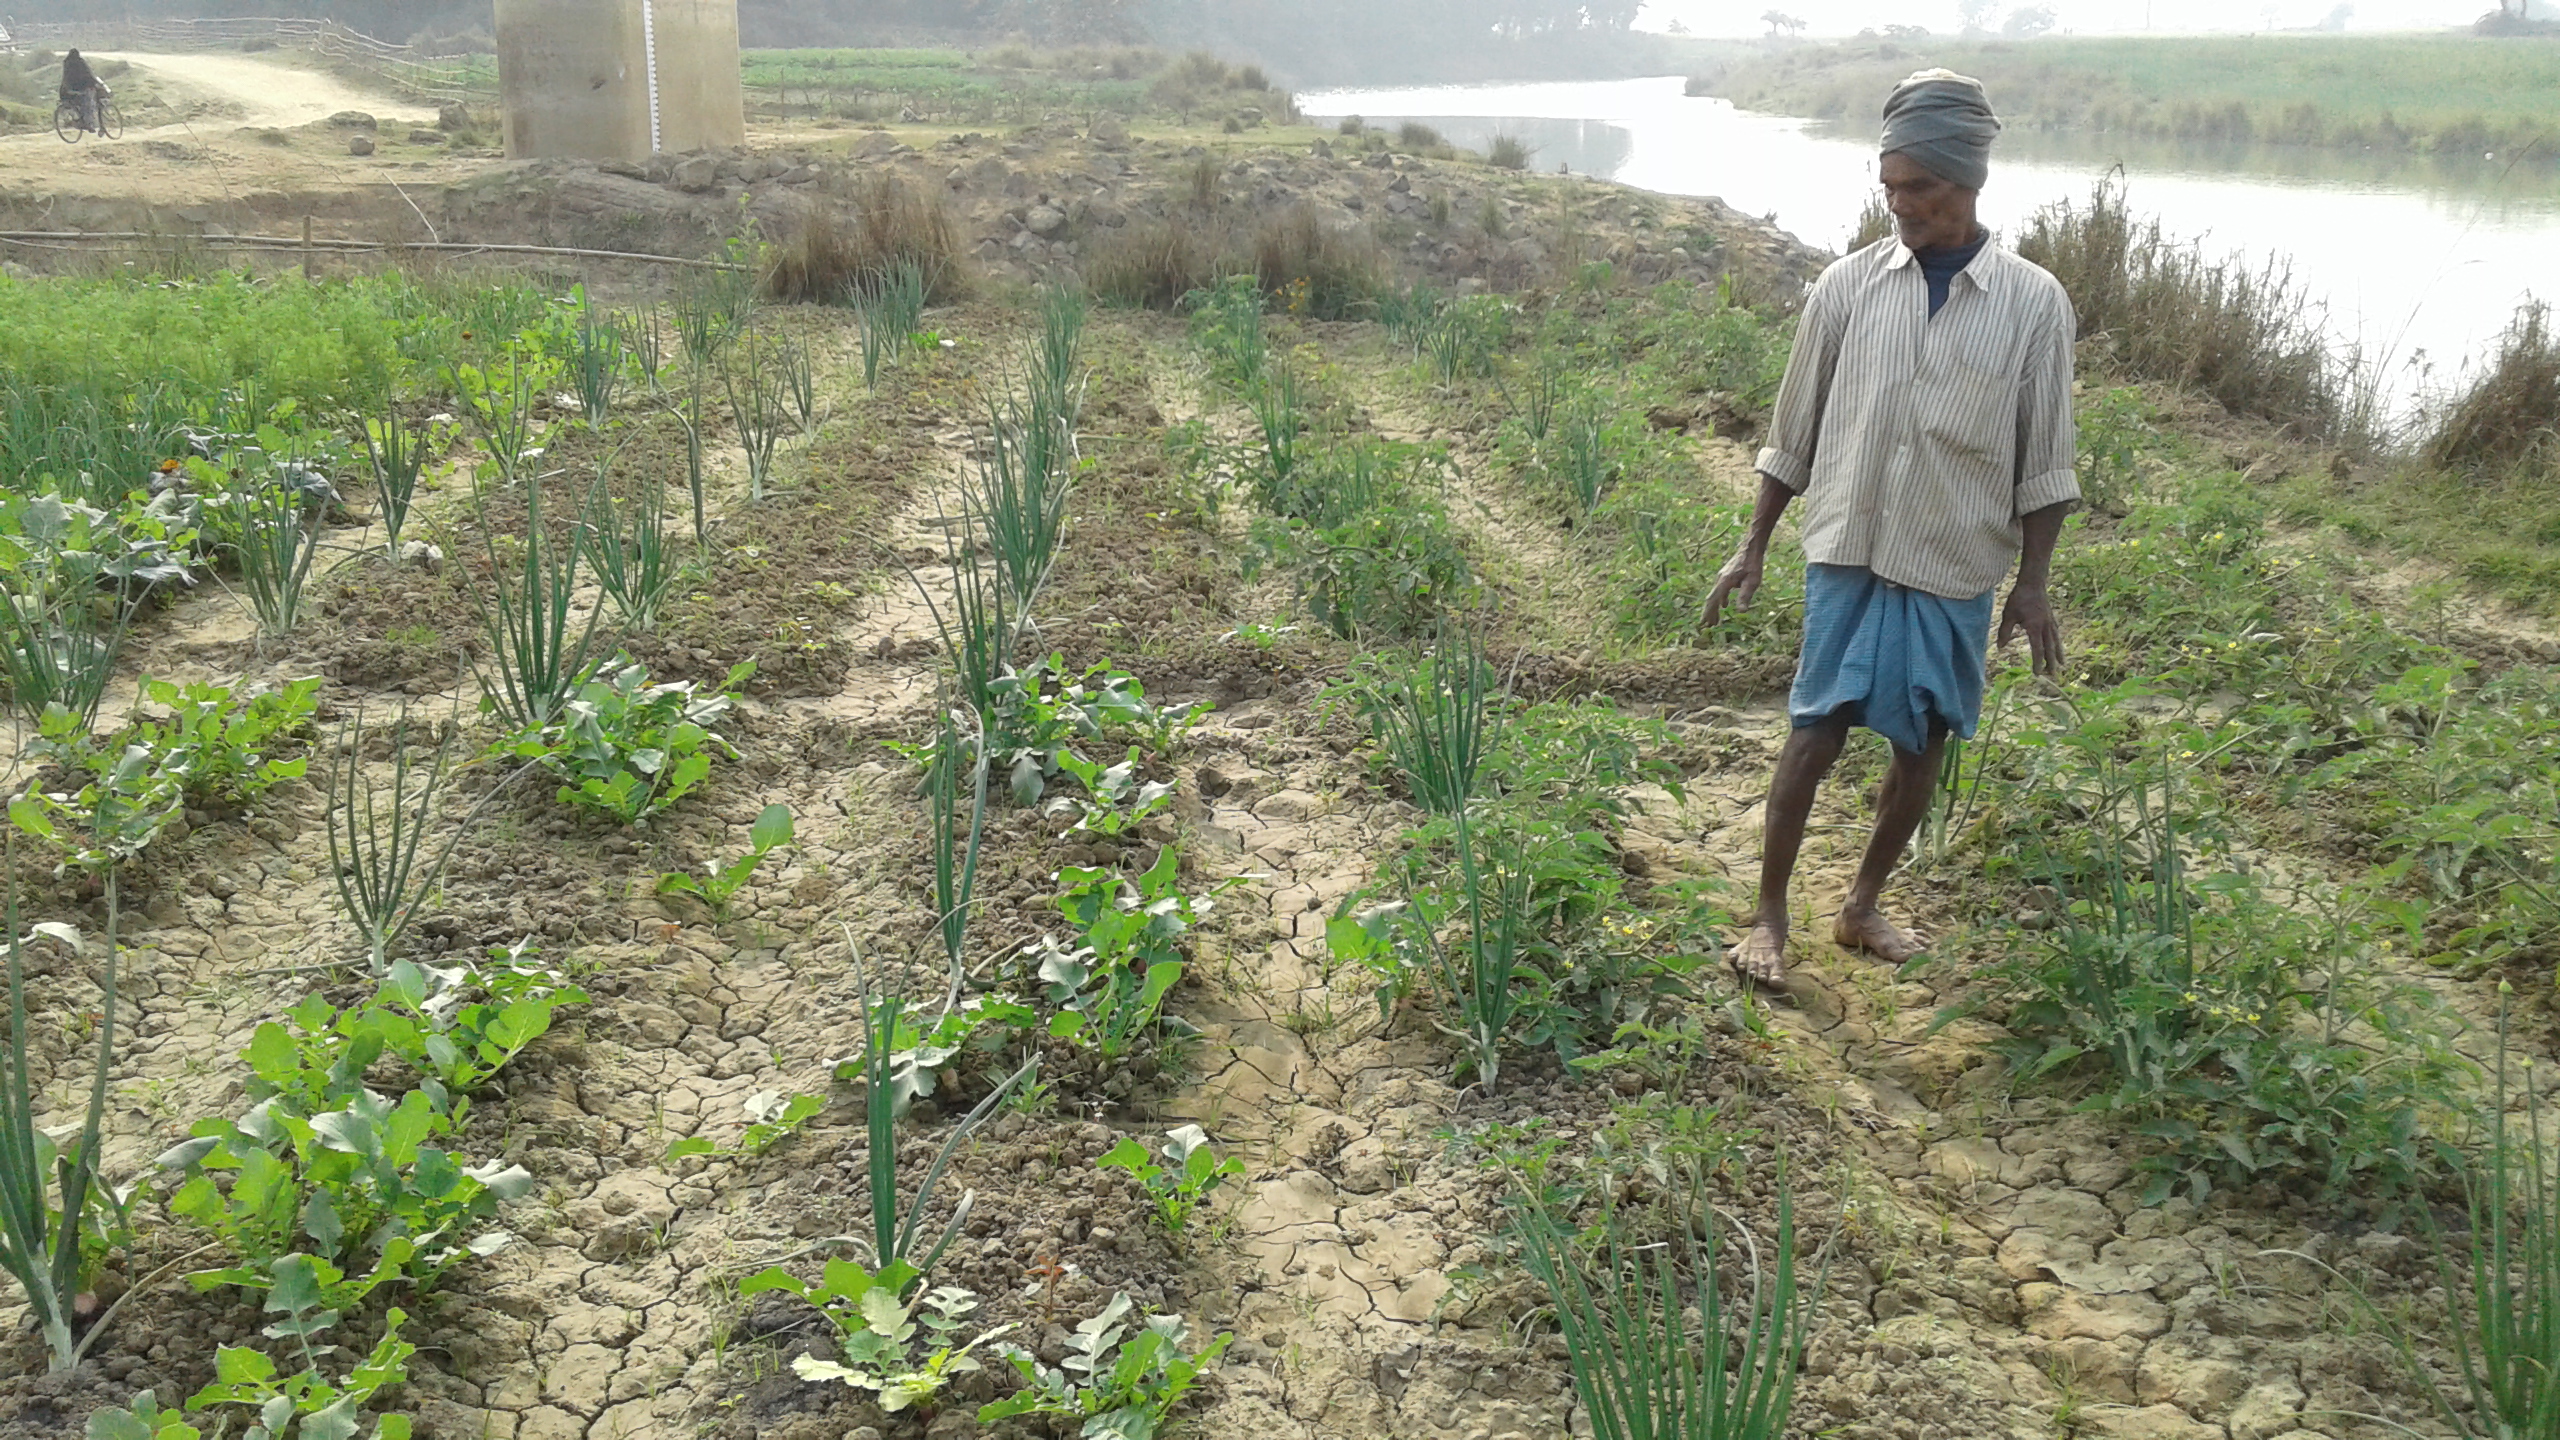 Organic farming makes it possible to farm multiple crops at the same time. (Photo: Gurvinder Singh)